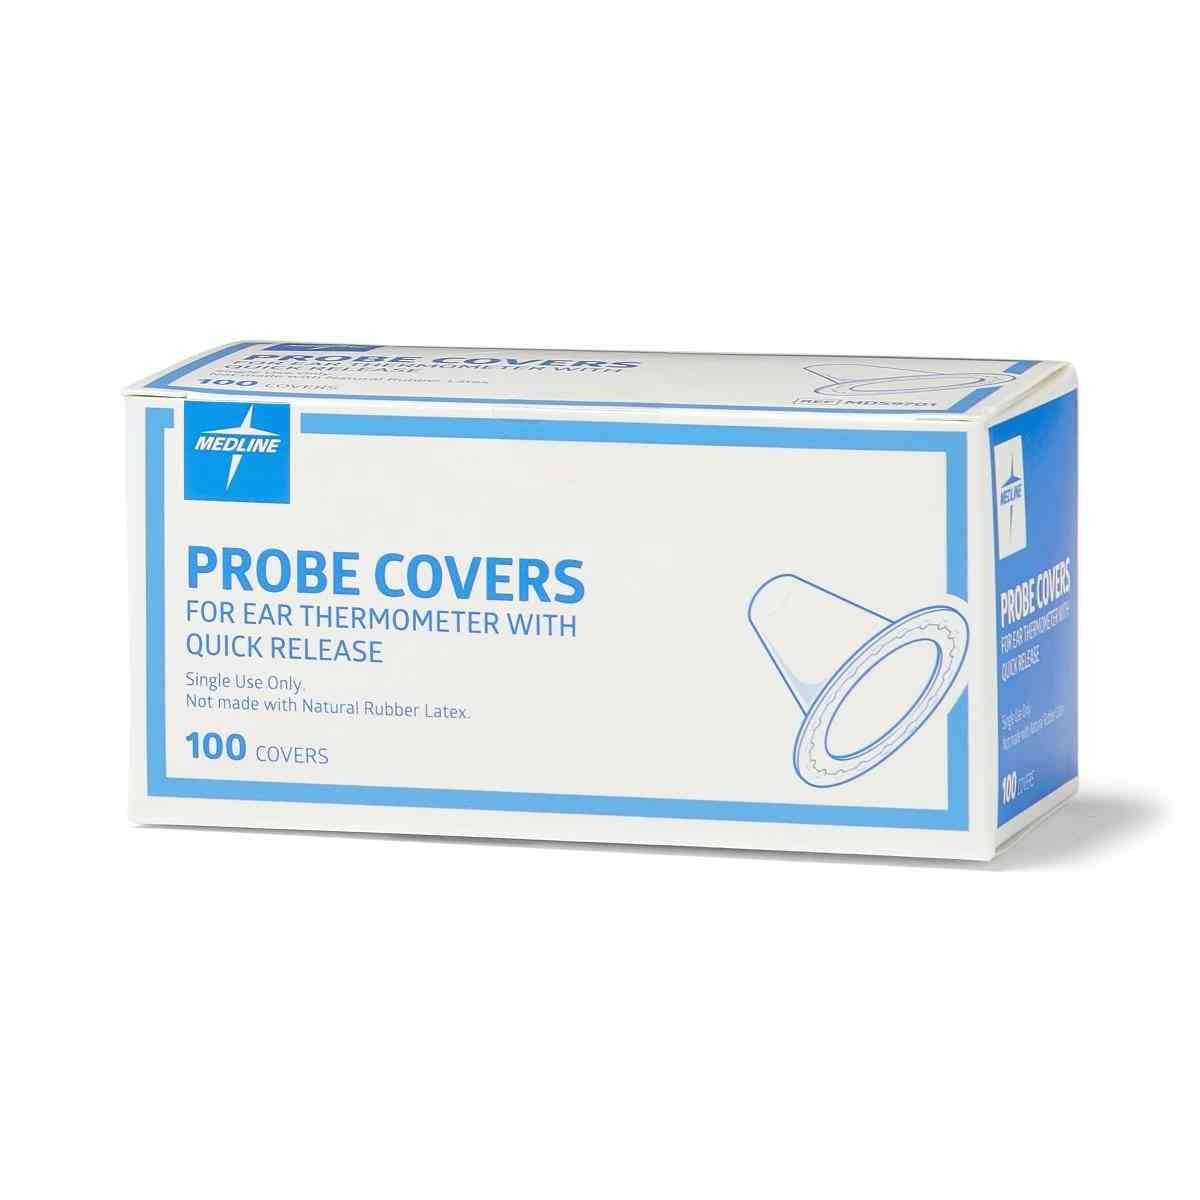 Medline Tympanic Thermometer Probe Covers, MDS9701, Box of 100